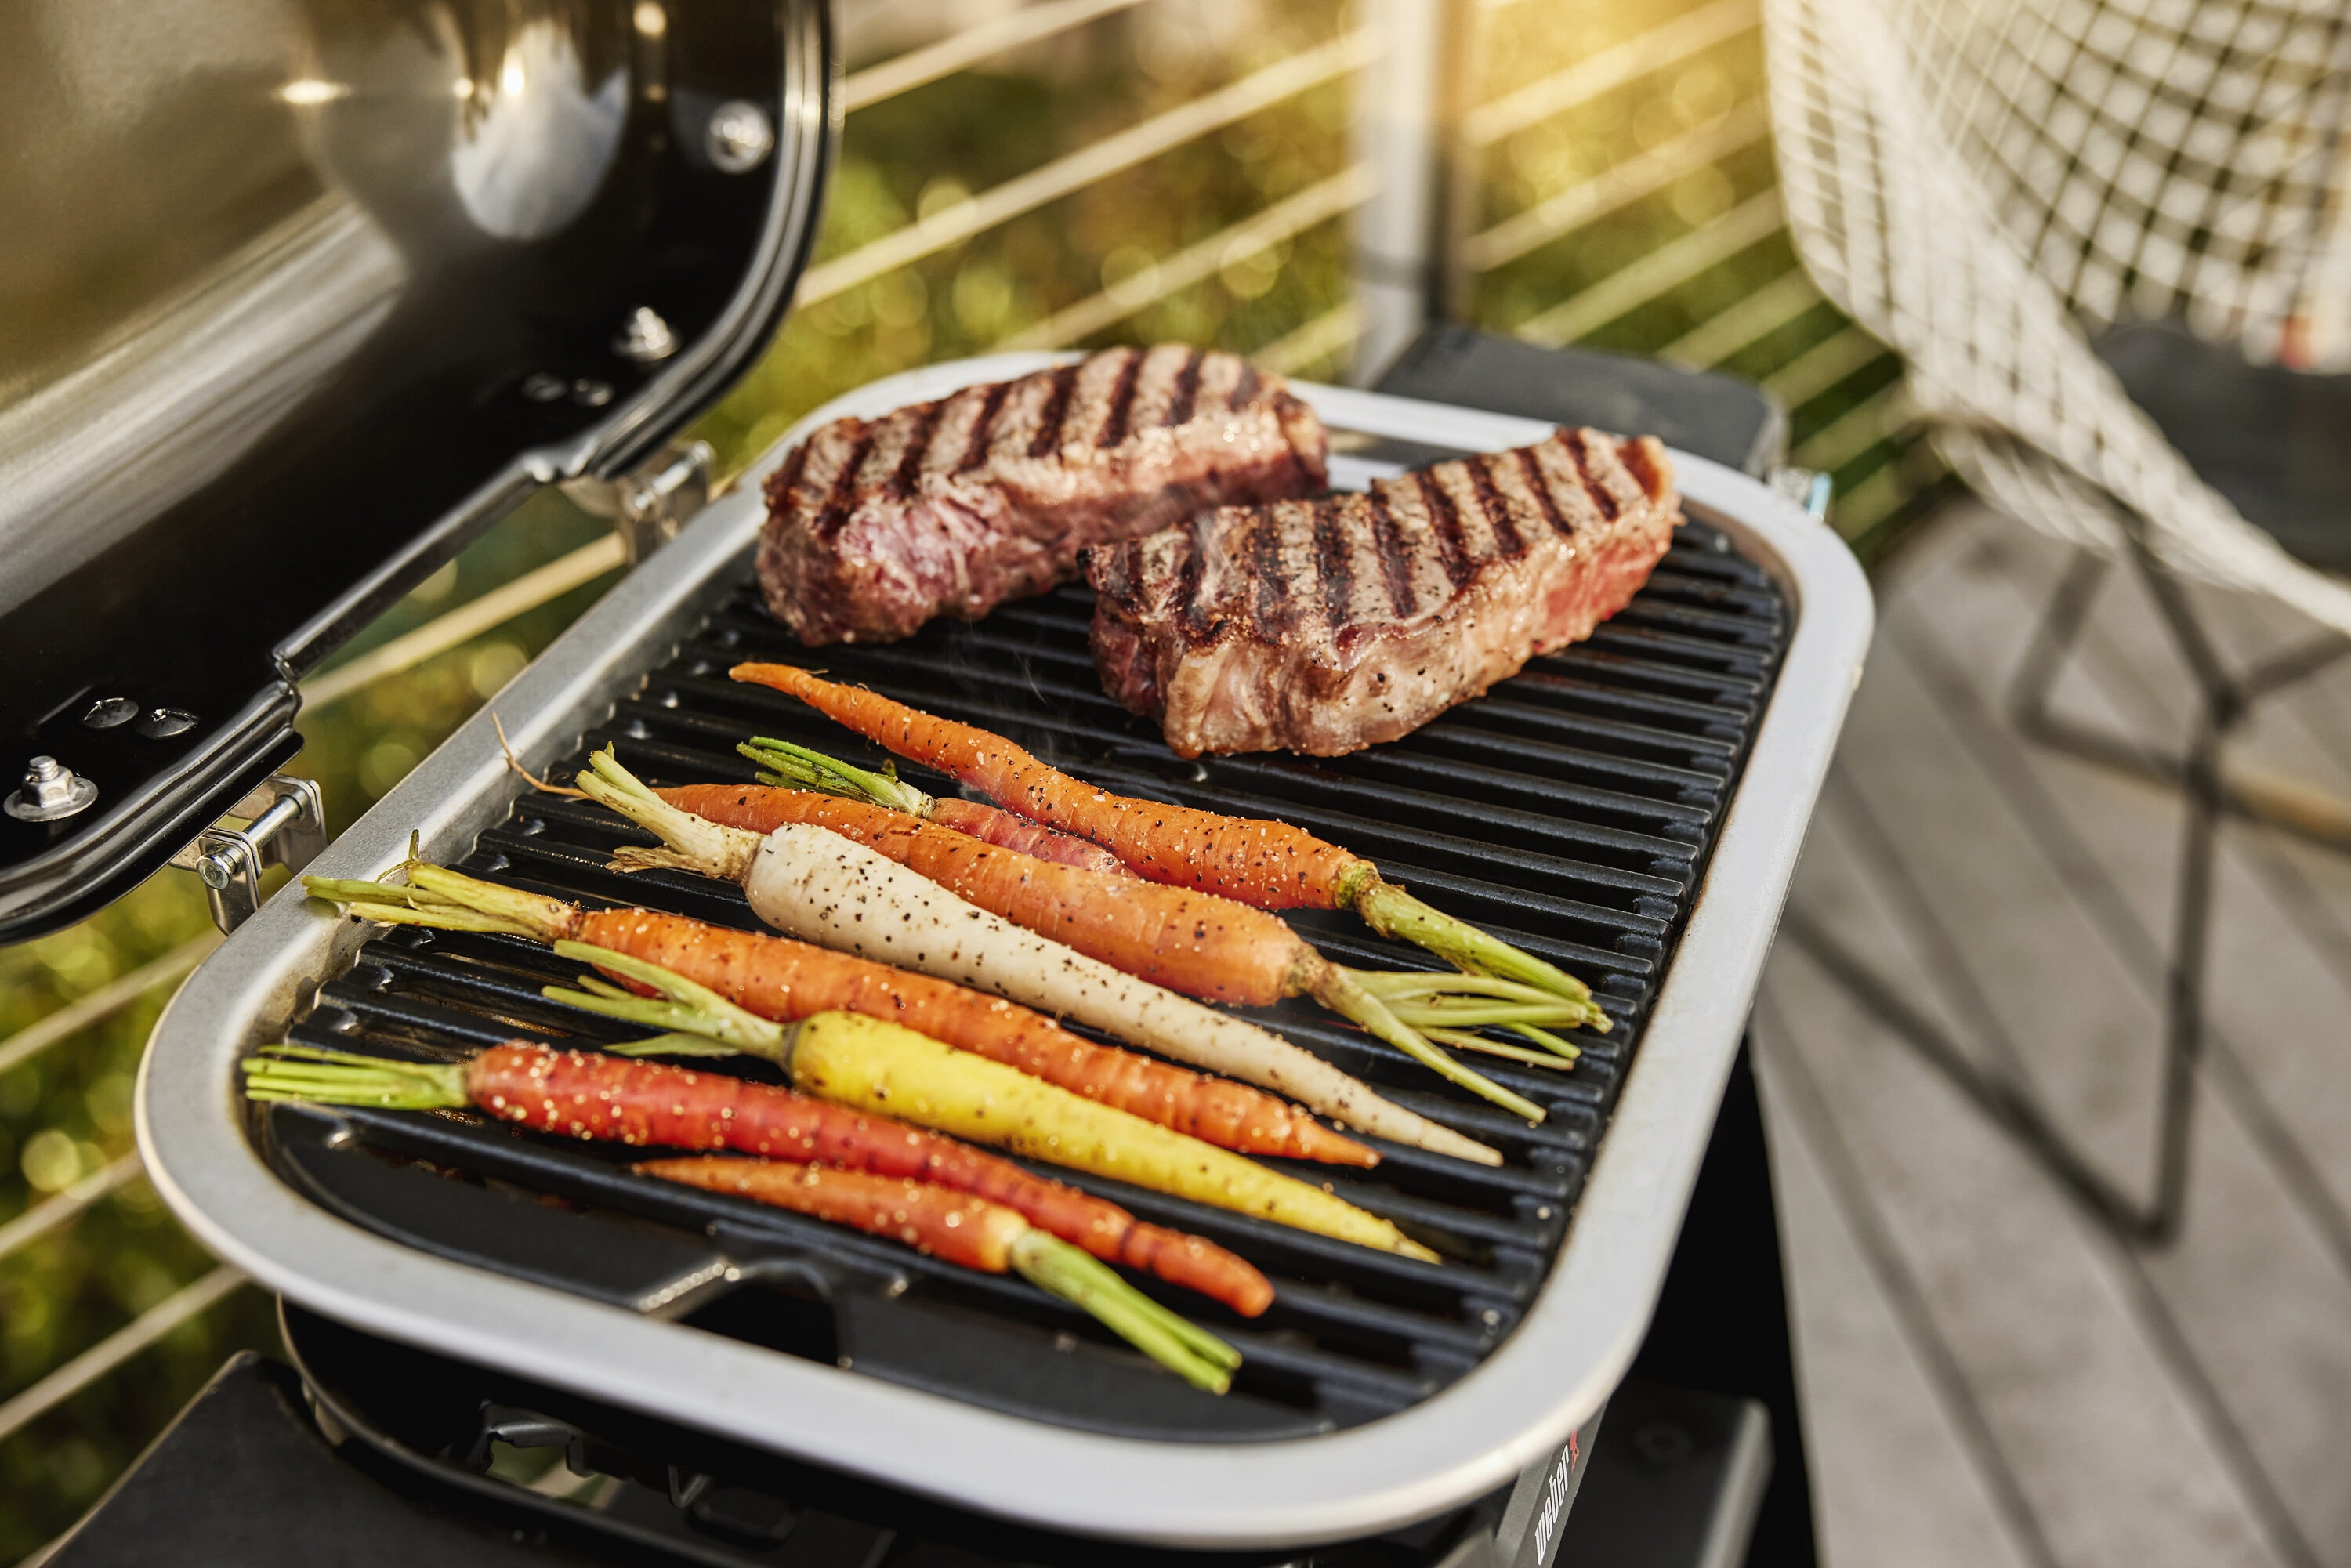 Expert Grill Disposable Grill Topper 3 Pack 16 x 12